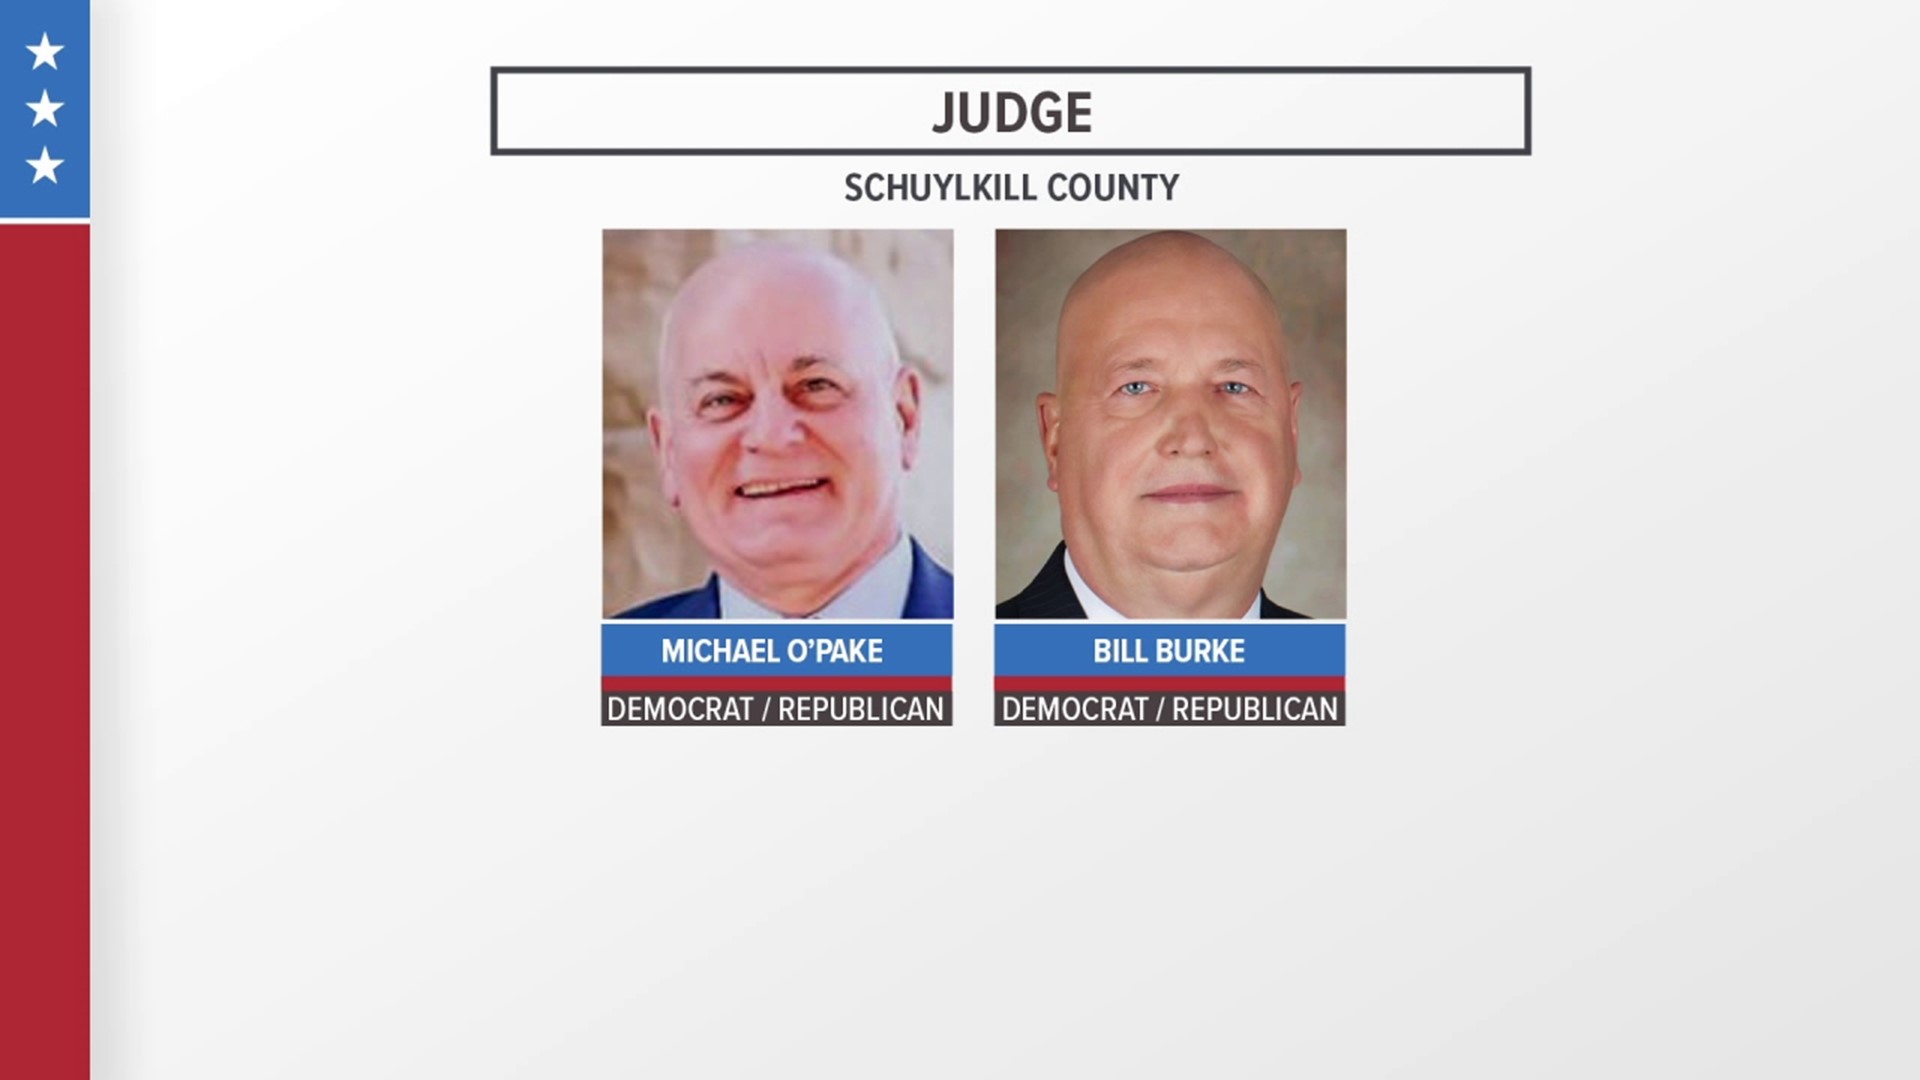 We are just over two weeks away from the primary election. One of the races on the ballot in Schuylkill County is for judge.